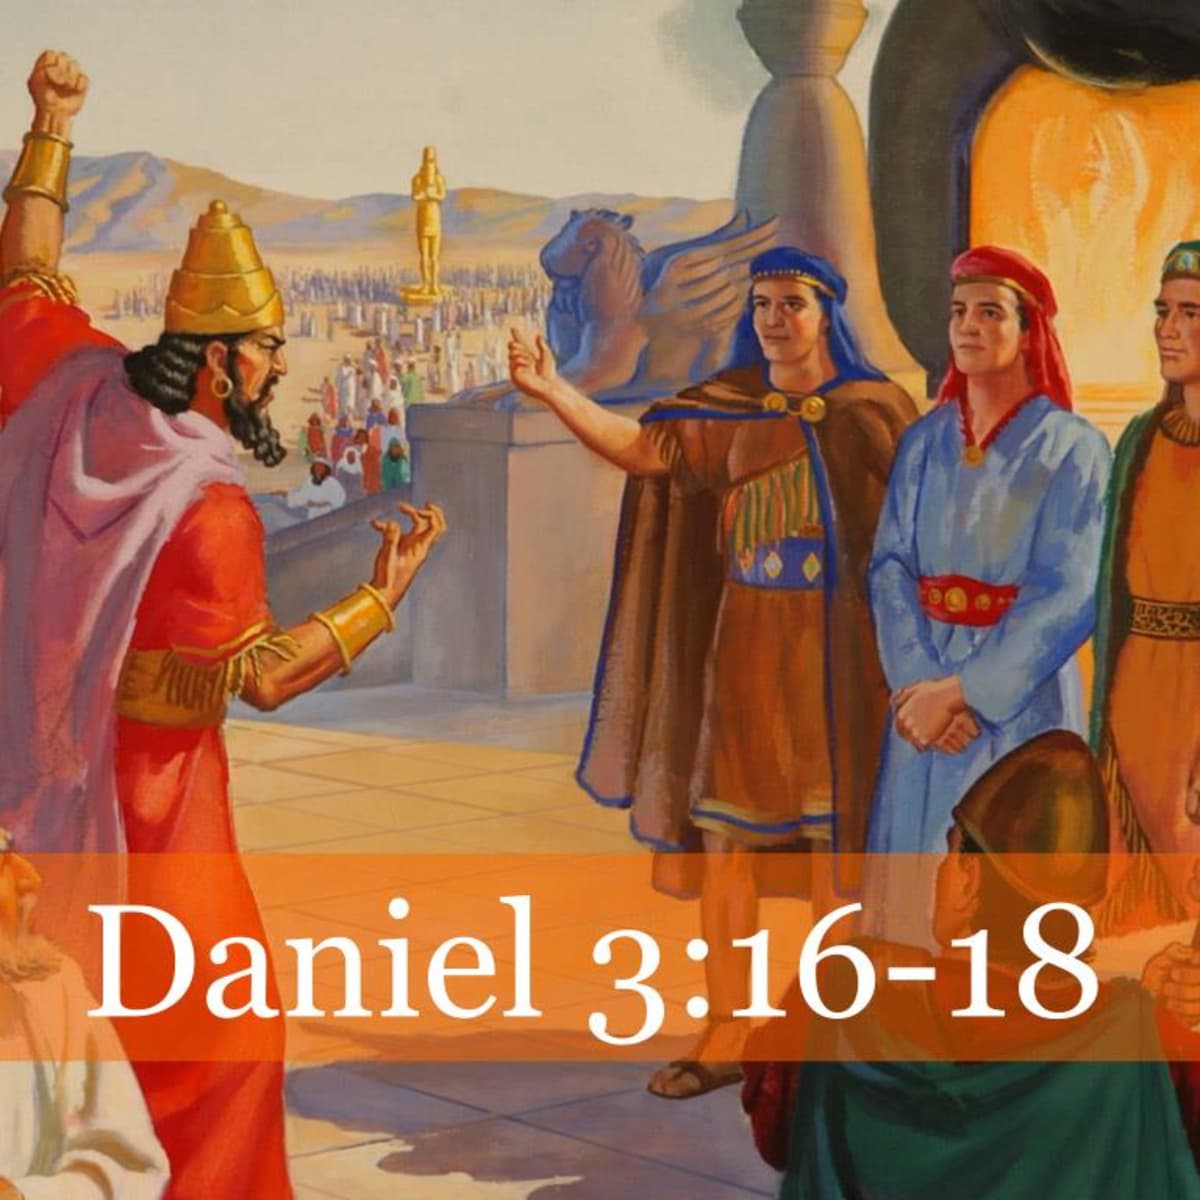 book of daniel chapter 1